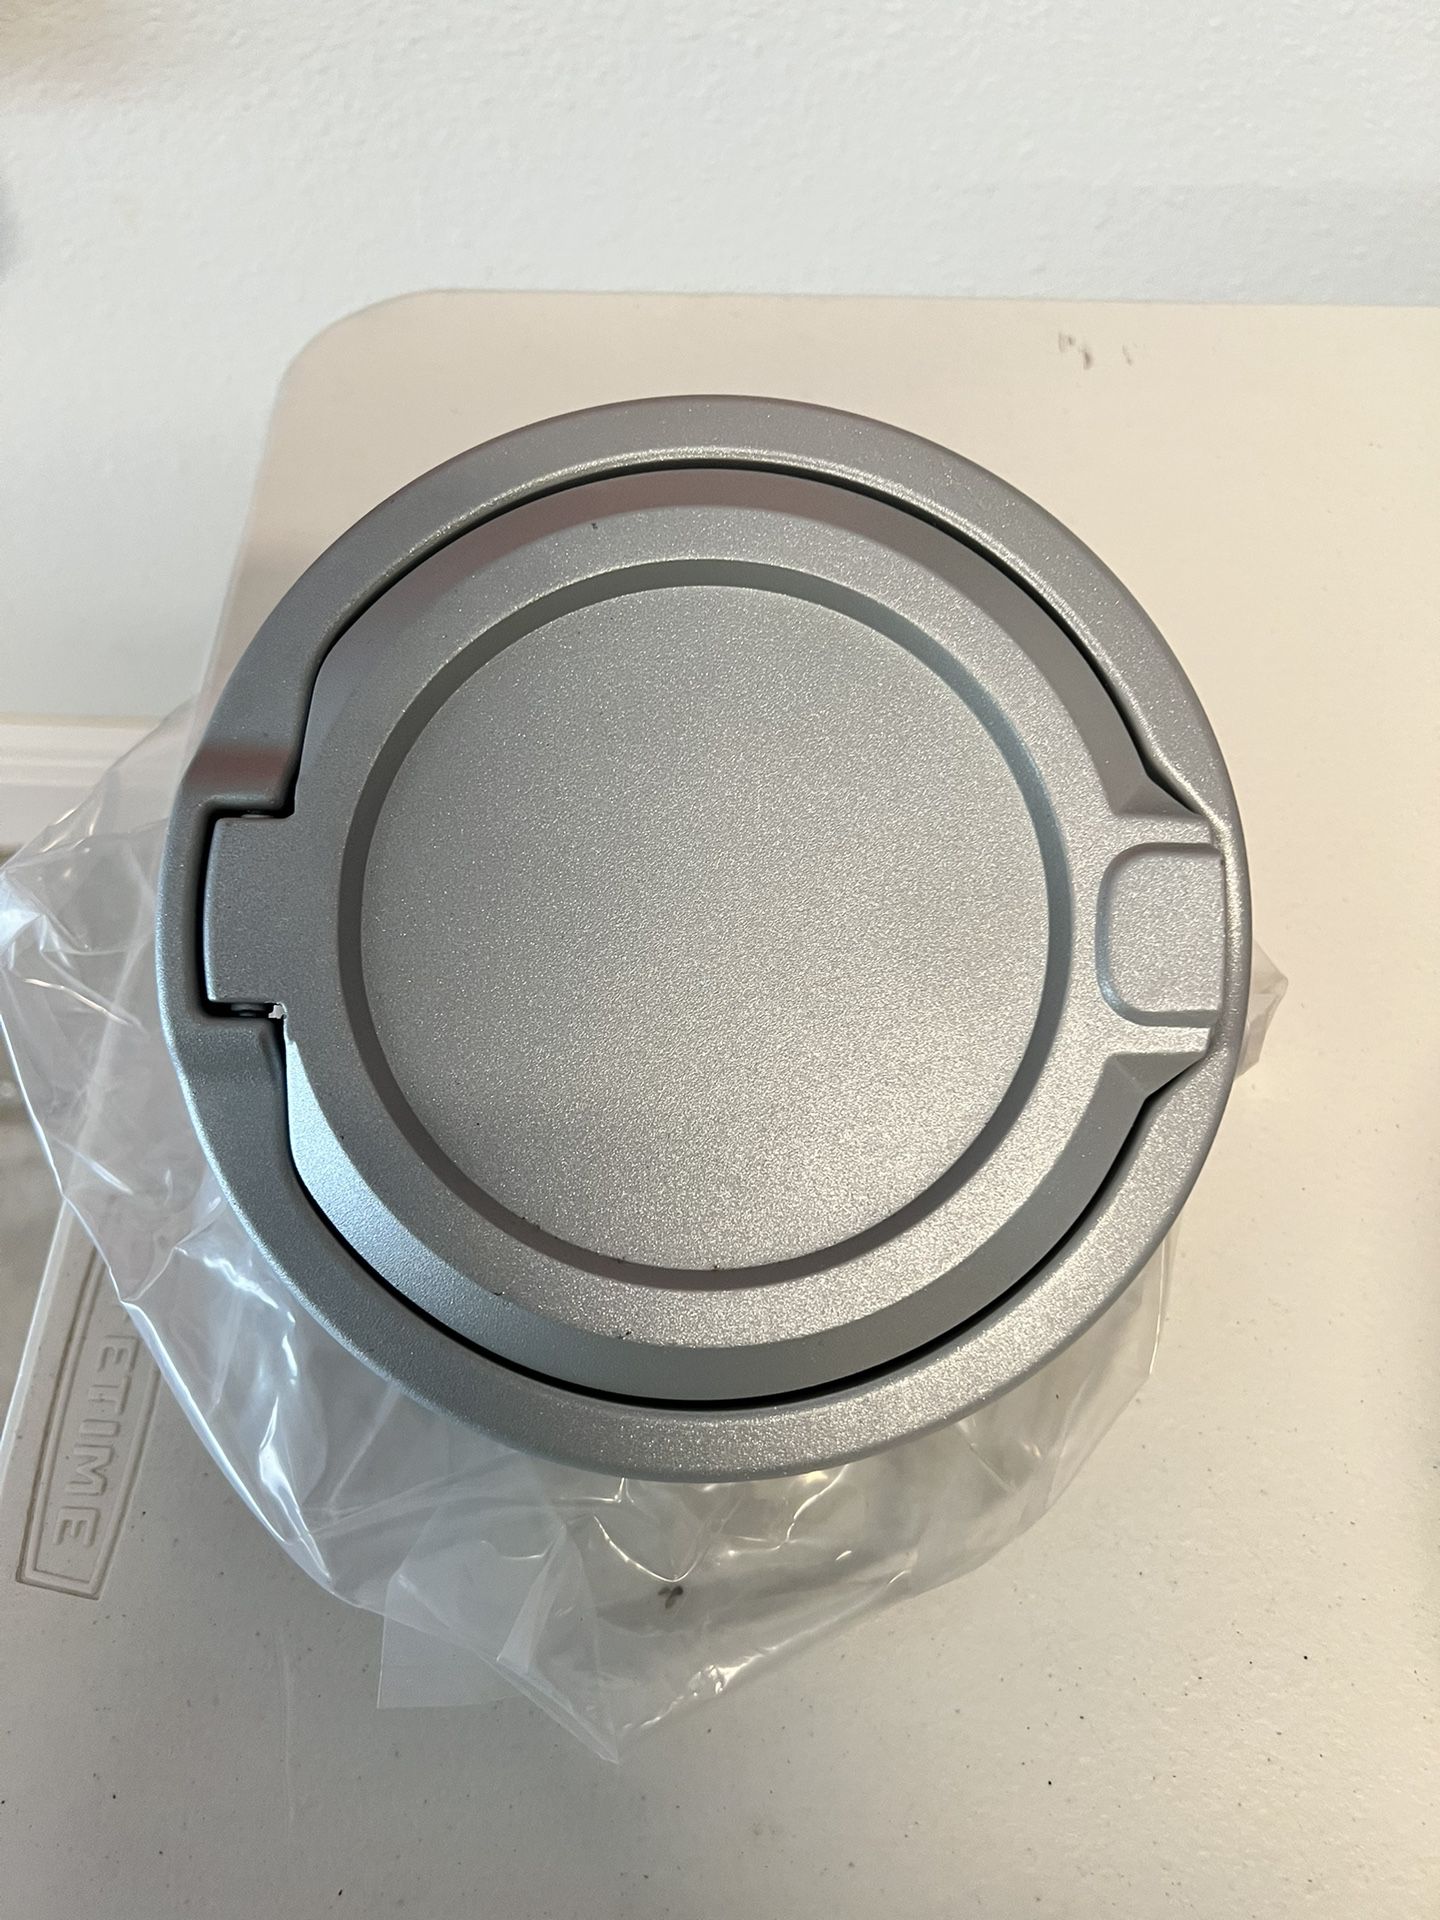 Jeep Fuel Filler Cover 2020